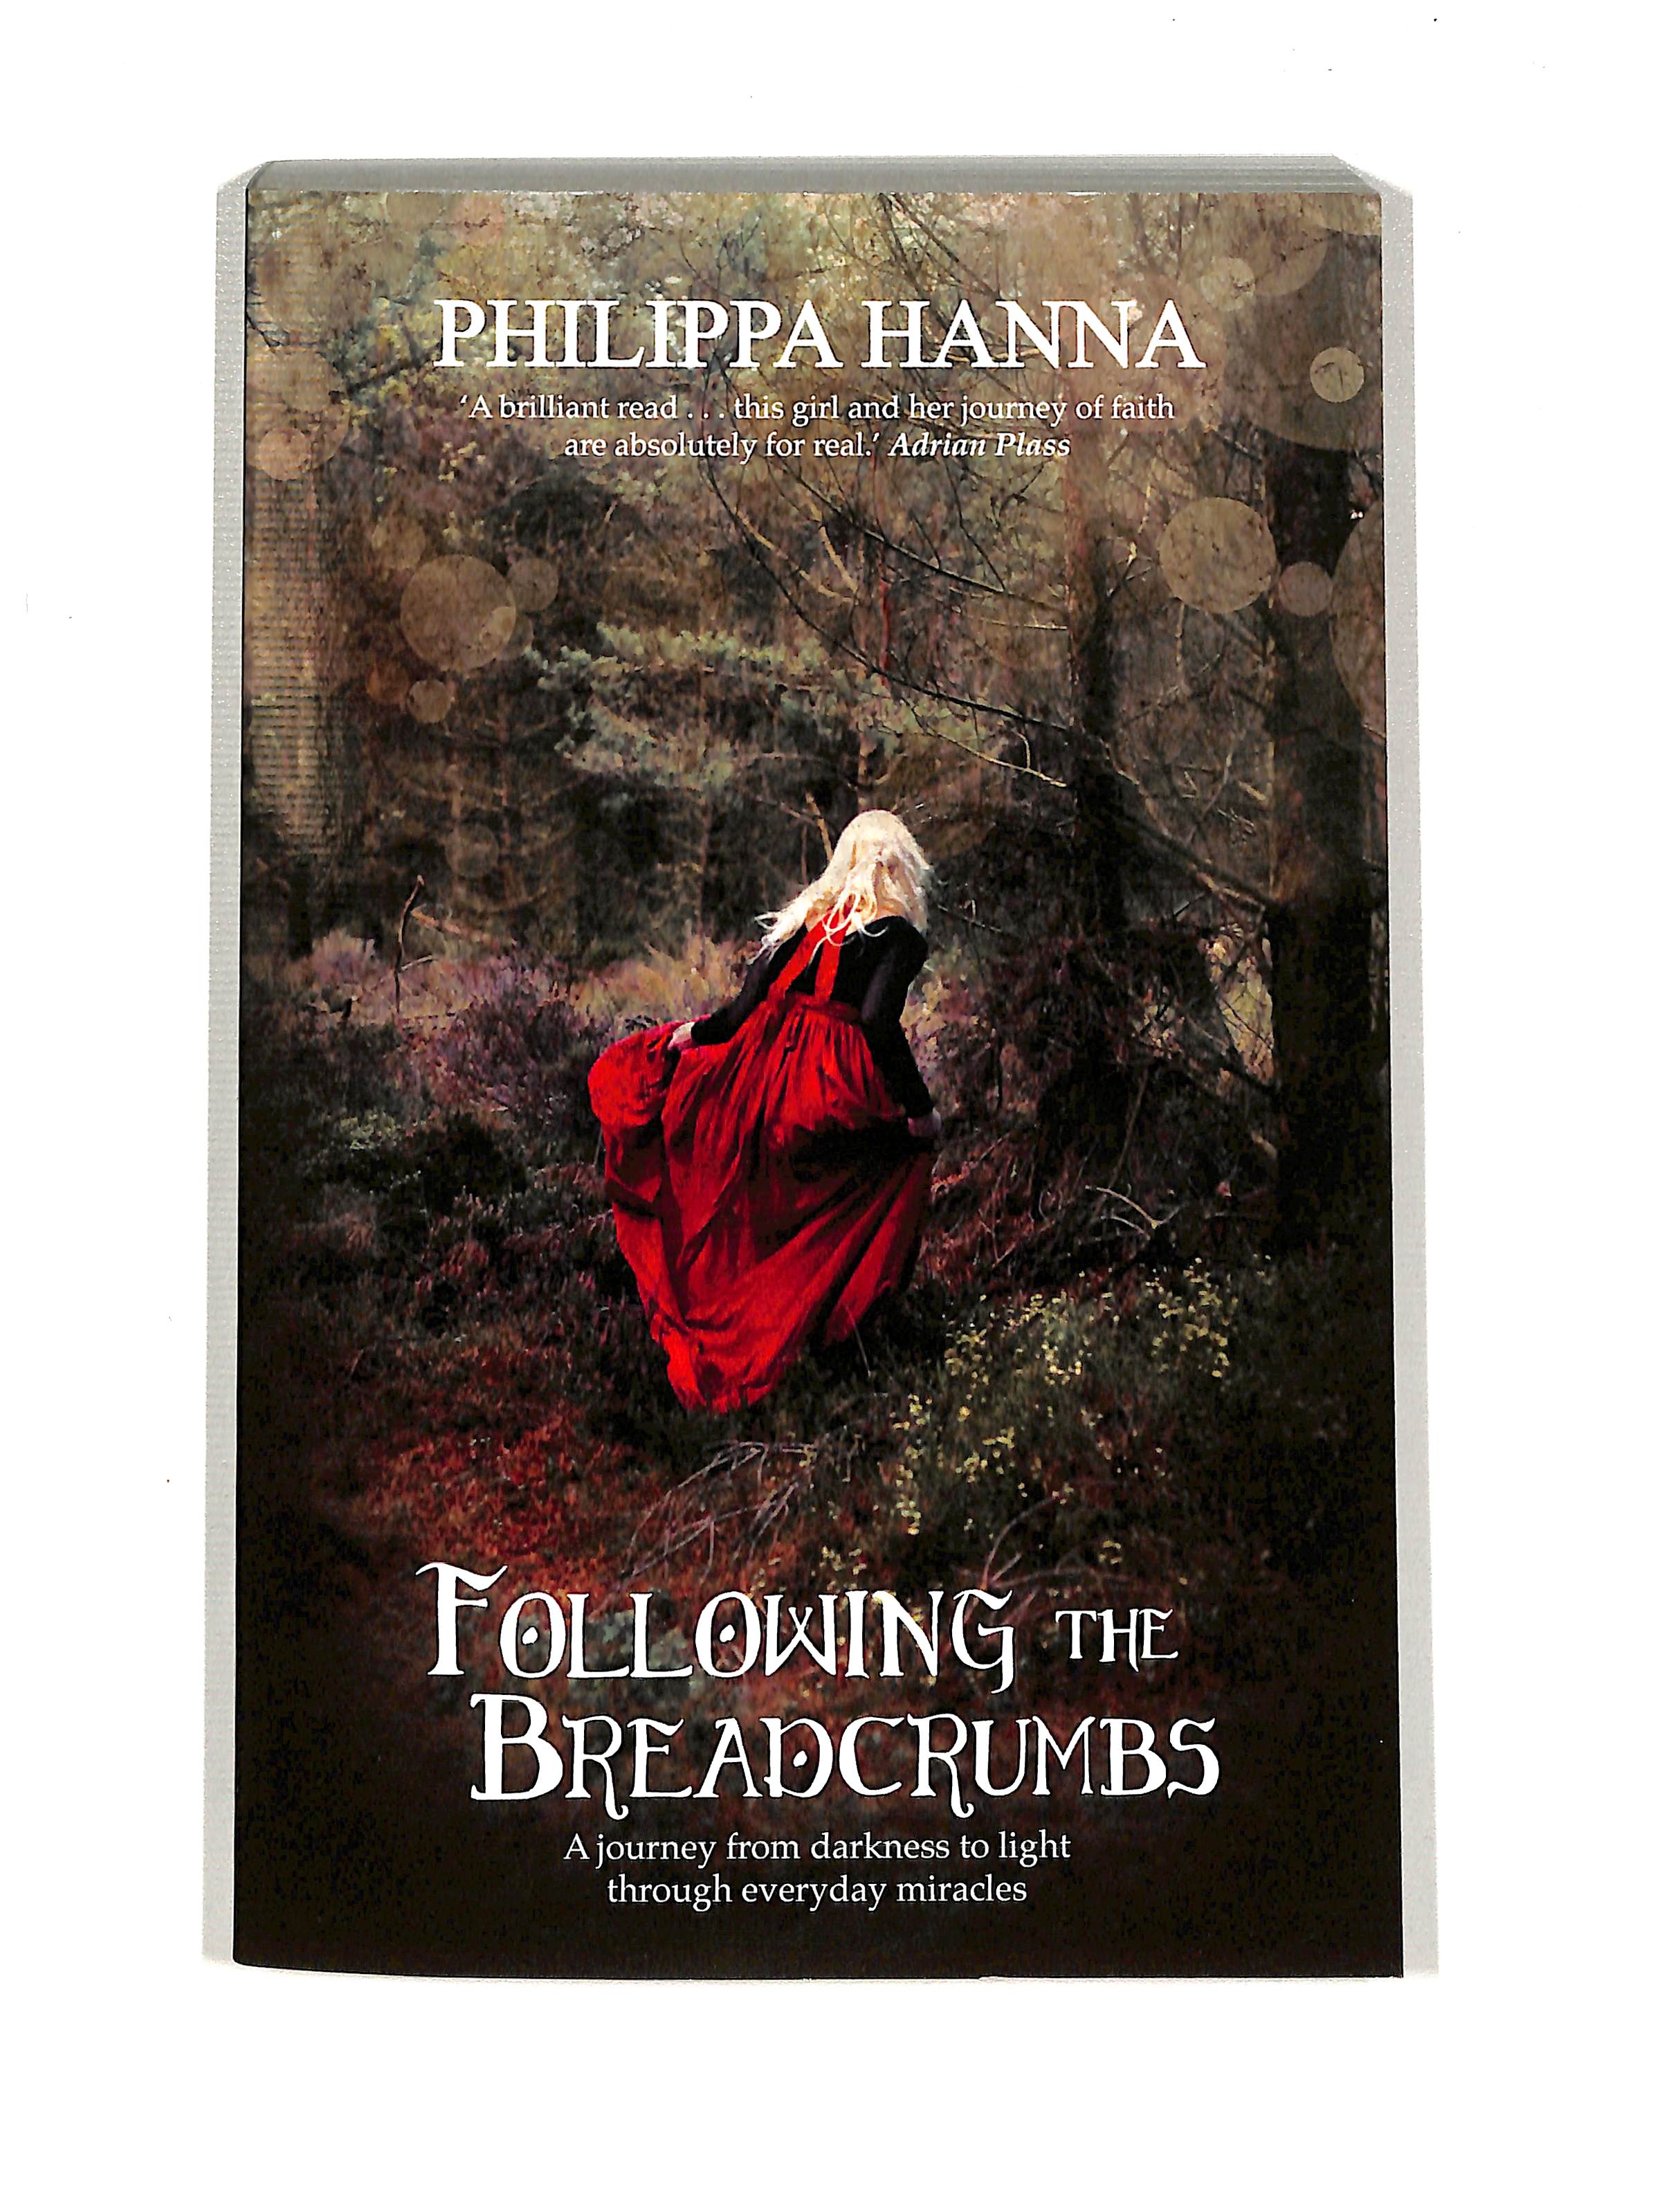 Image of Following The Breadcrumbs other